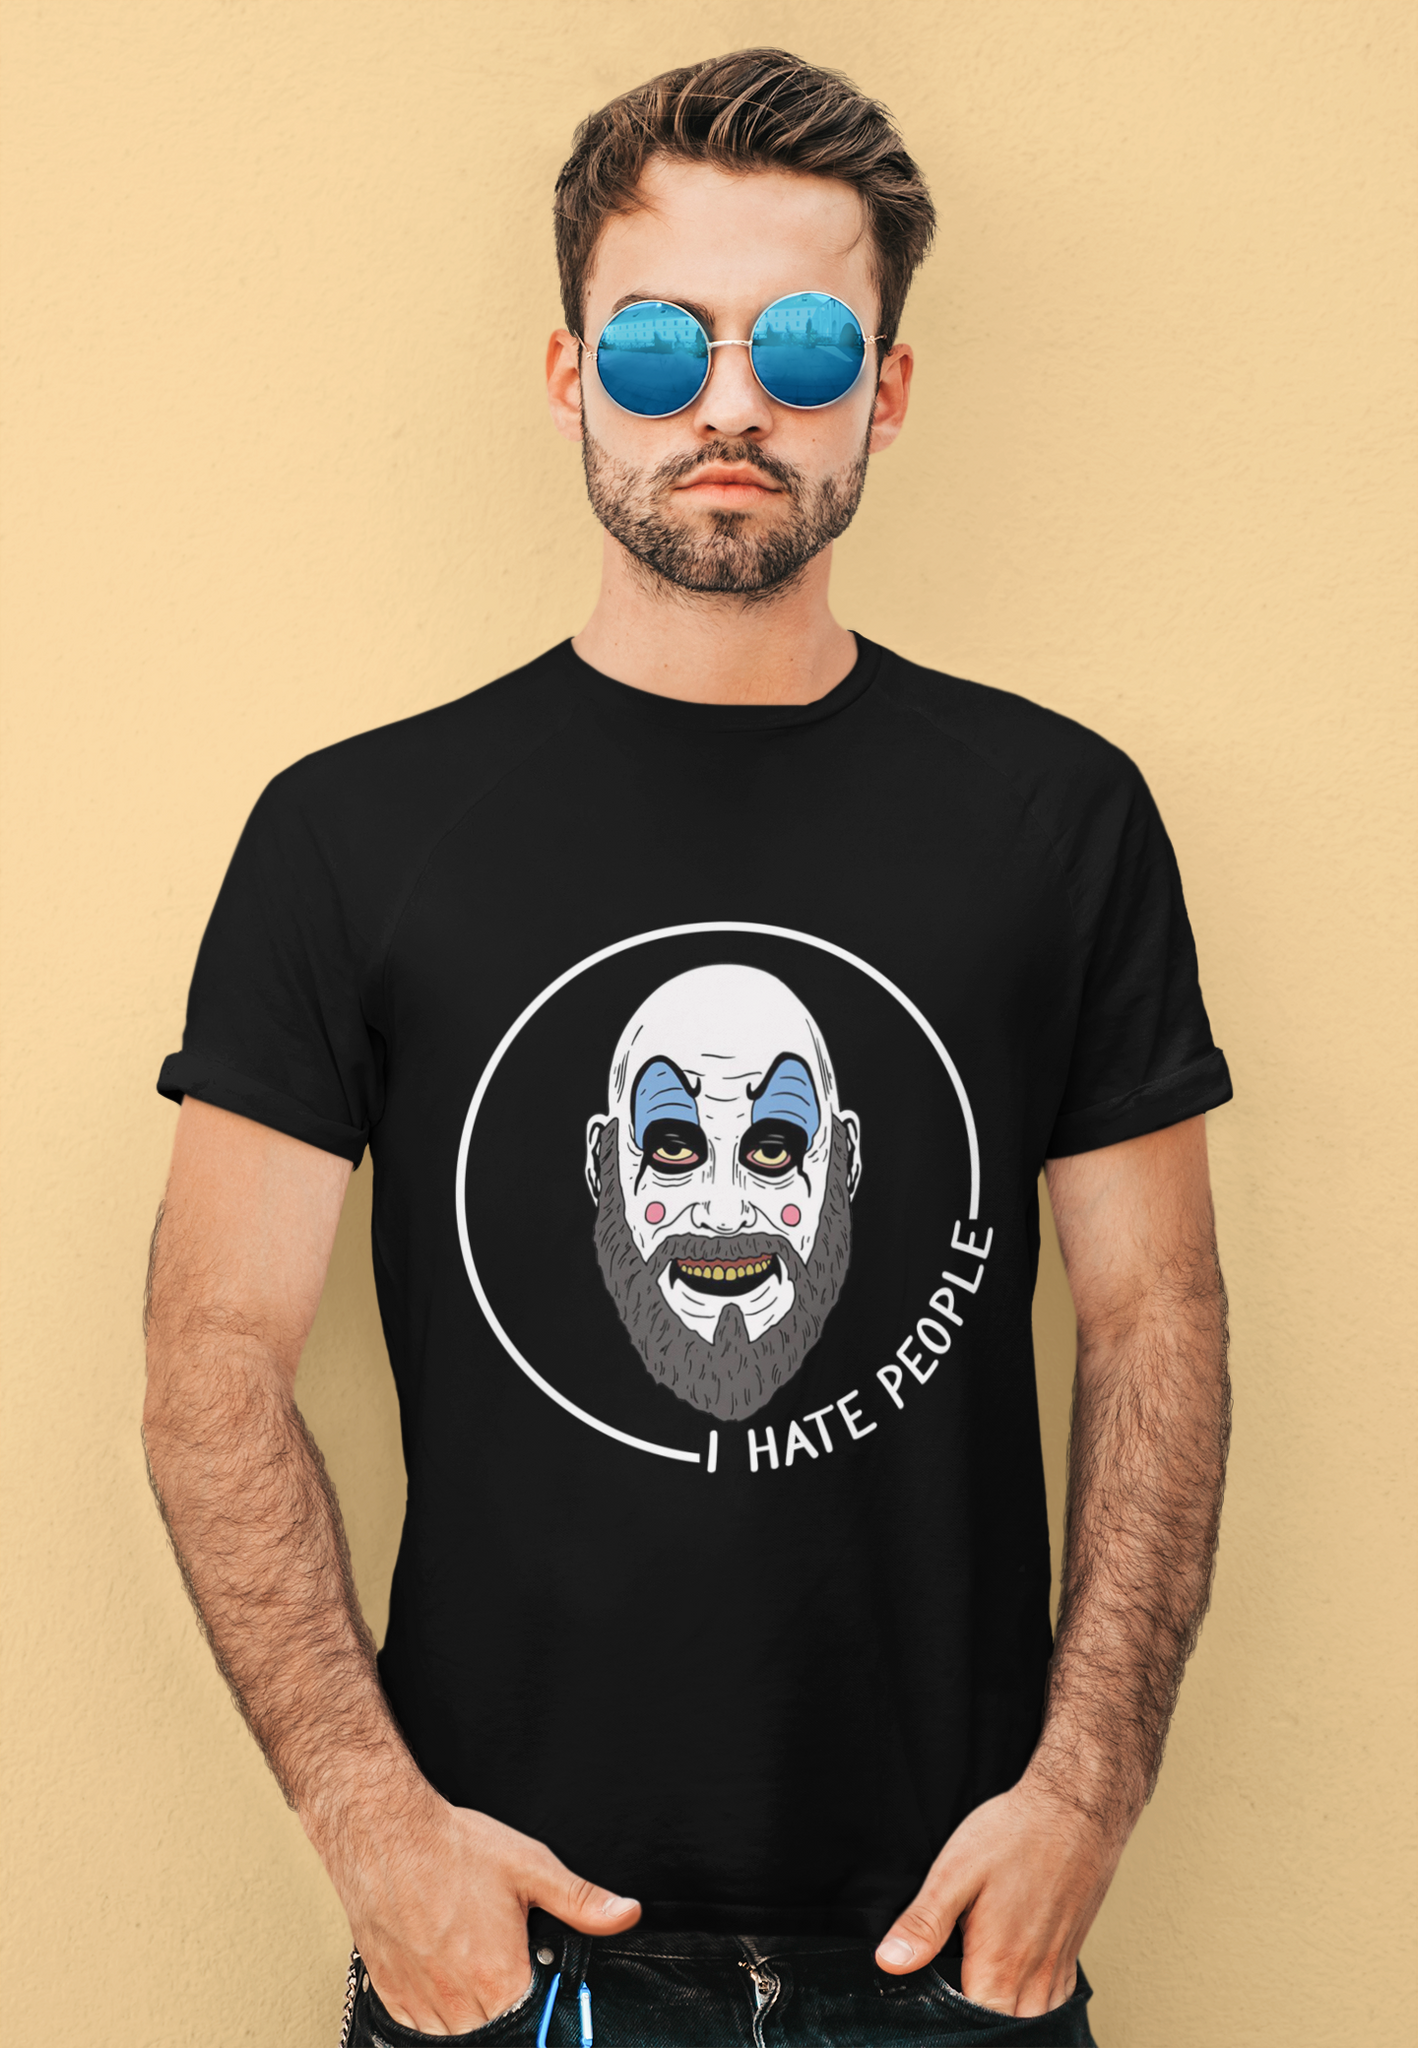 House Of 1000 Corpses T Shirt, I Hate People Tshirt, Captain Spaulding T Shirt, Halloween Gifts